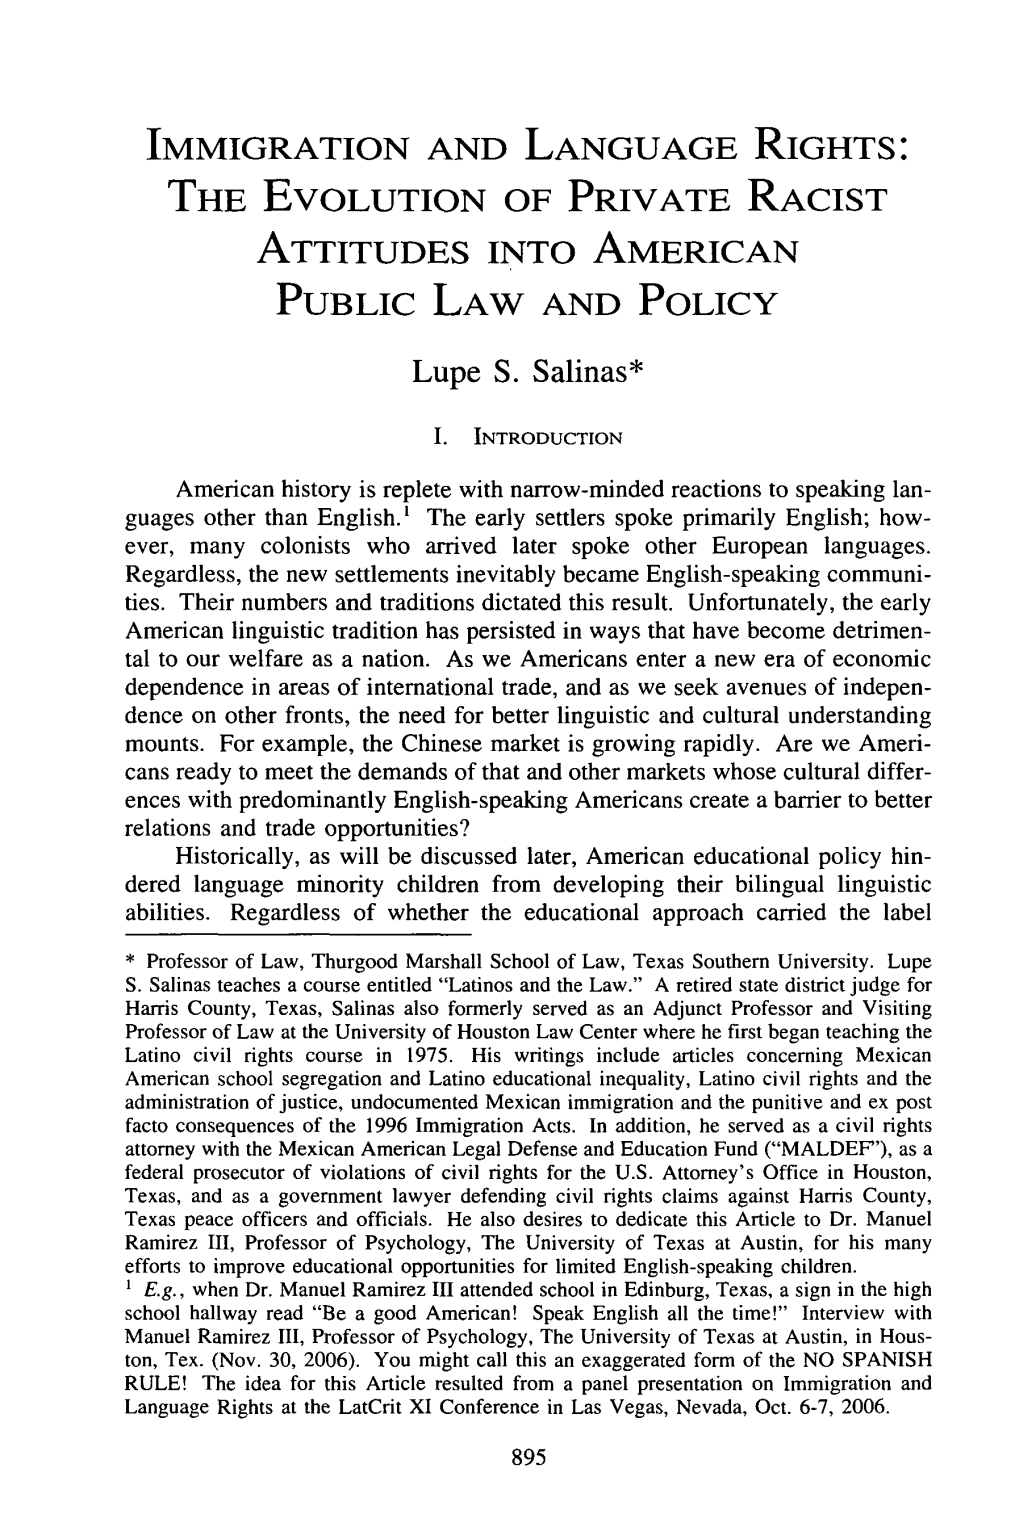 Immigration and Language Rights: the Evolution of Private Racist Attitudes Into American Public Law and Policy